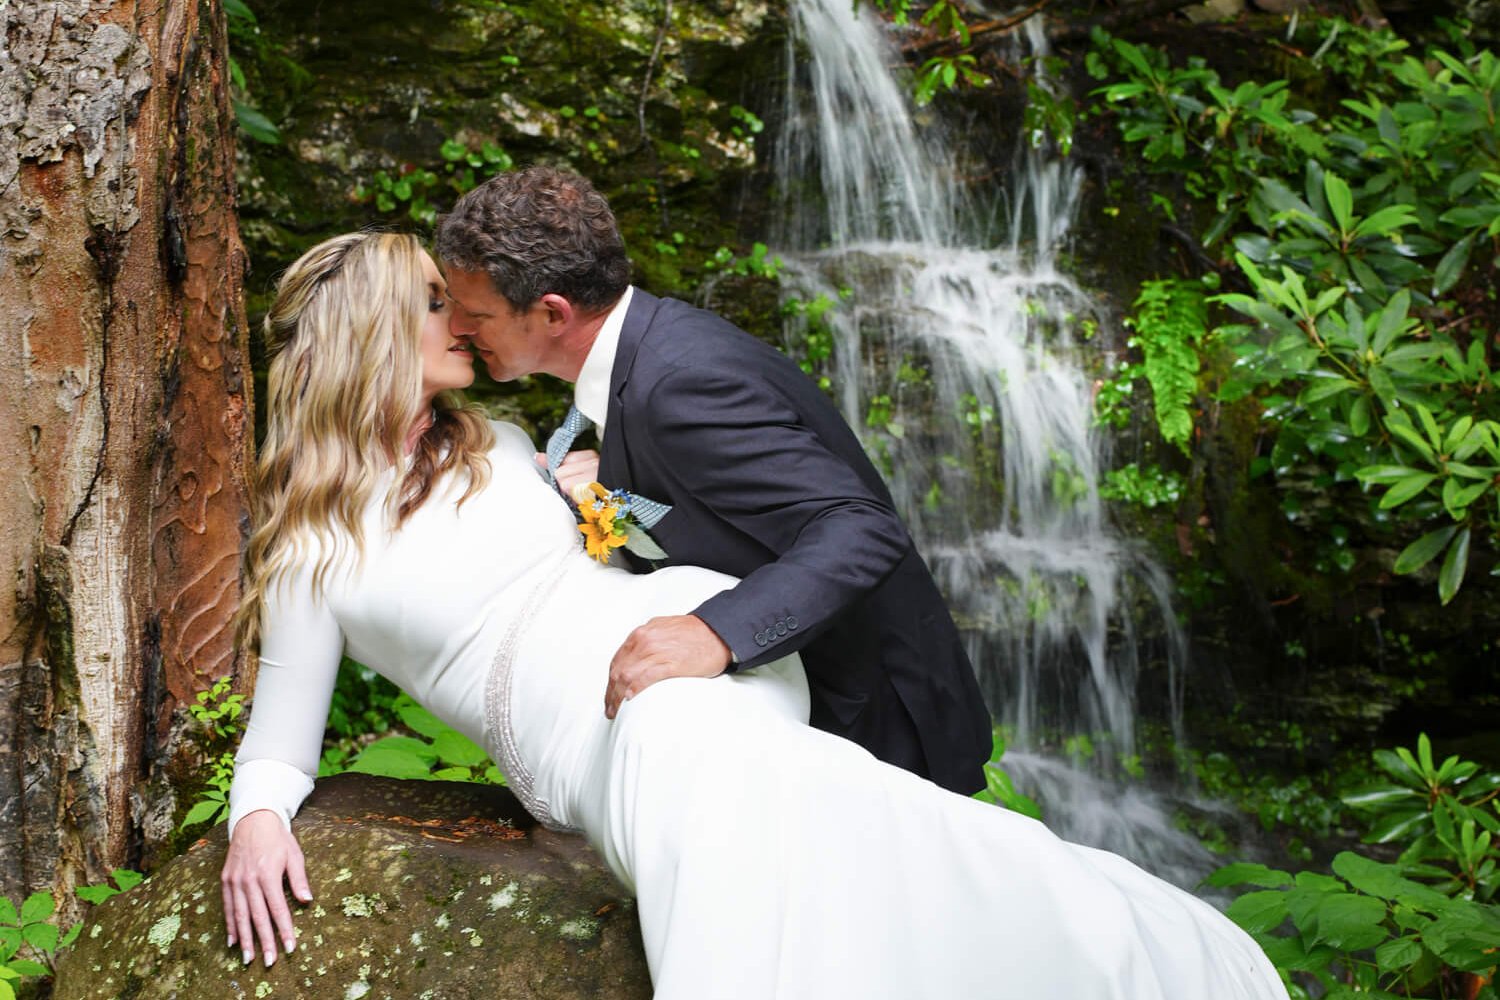 Groom kissing his bride passionately against a rock in front of a waterfall in the Smoky Mountains